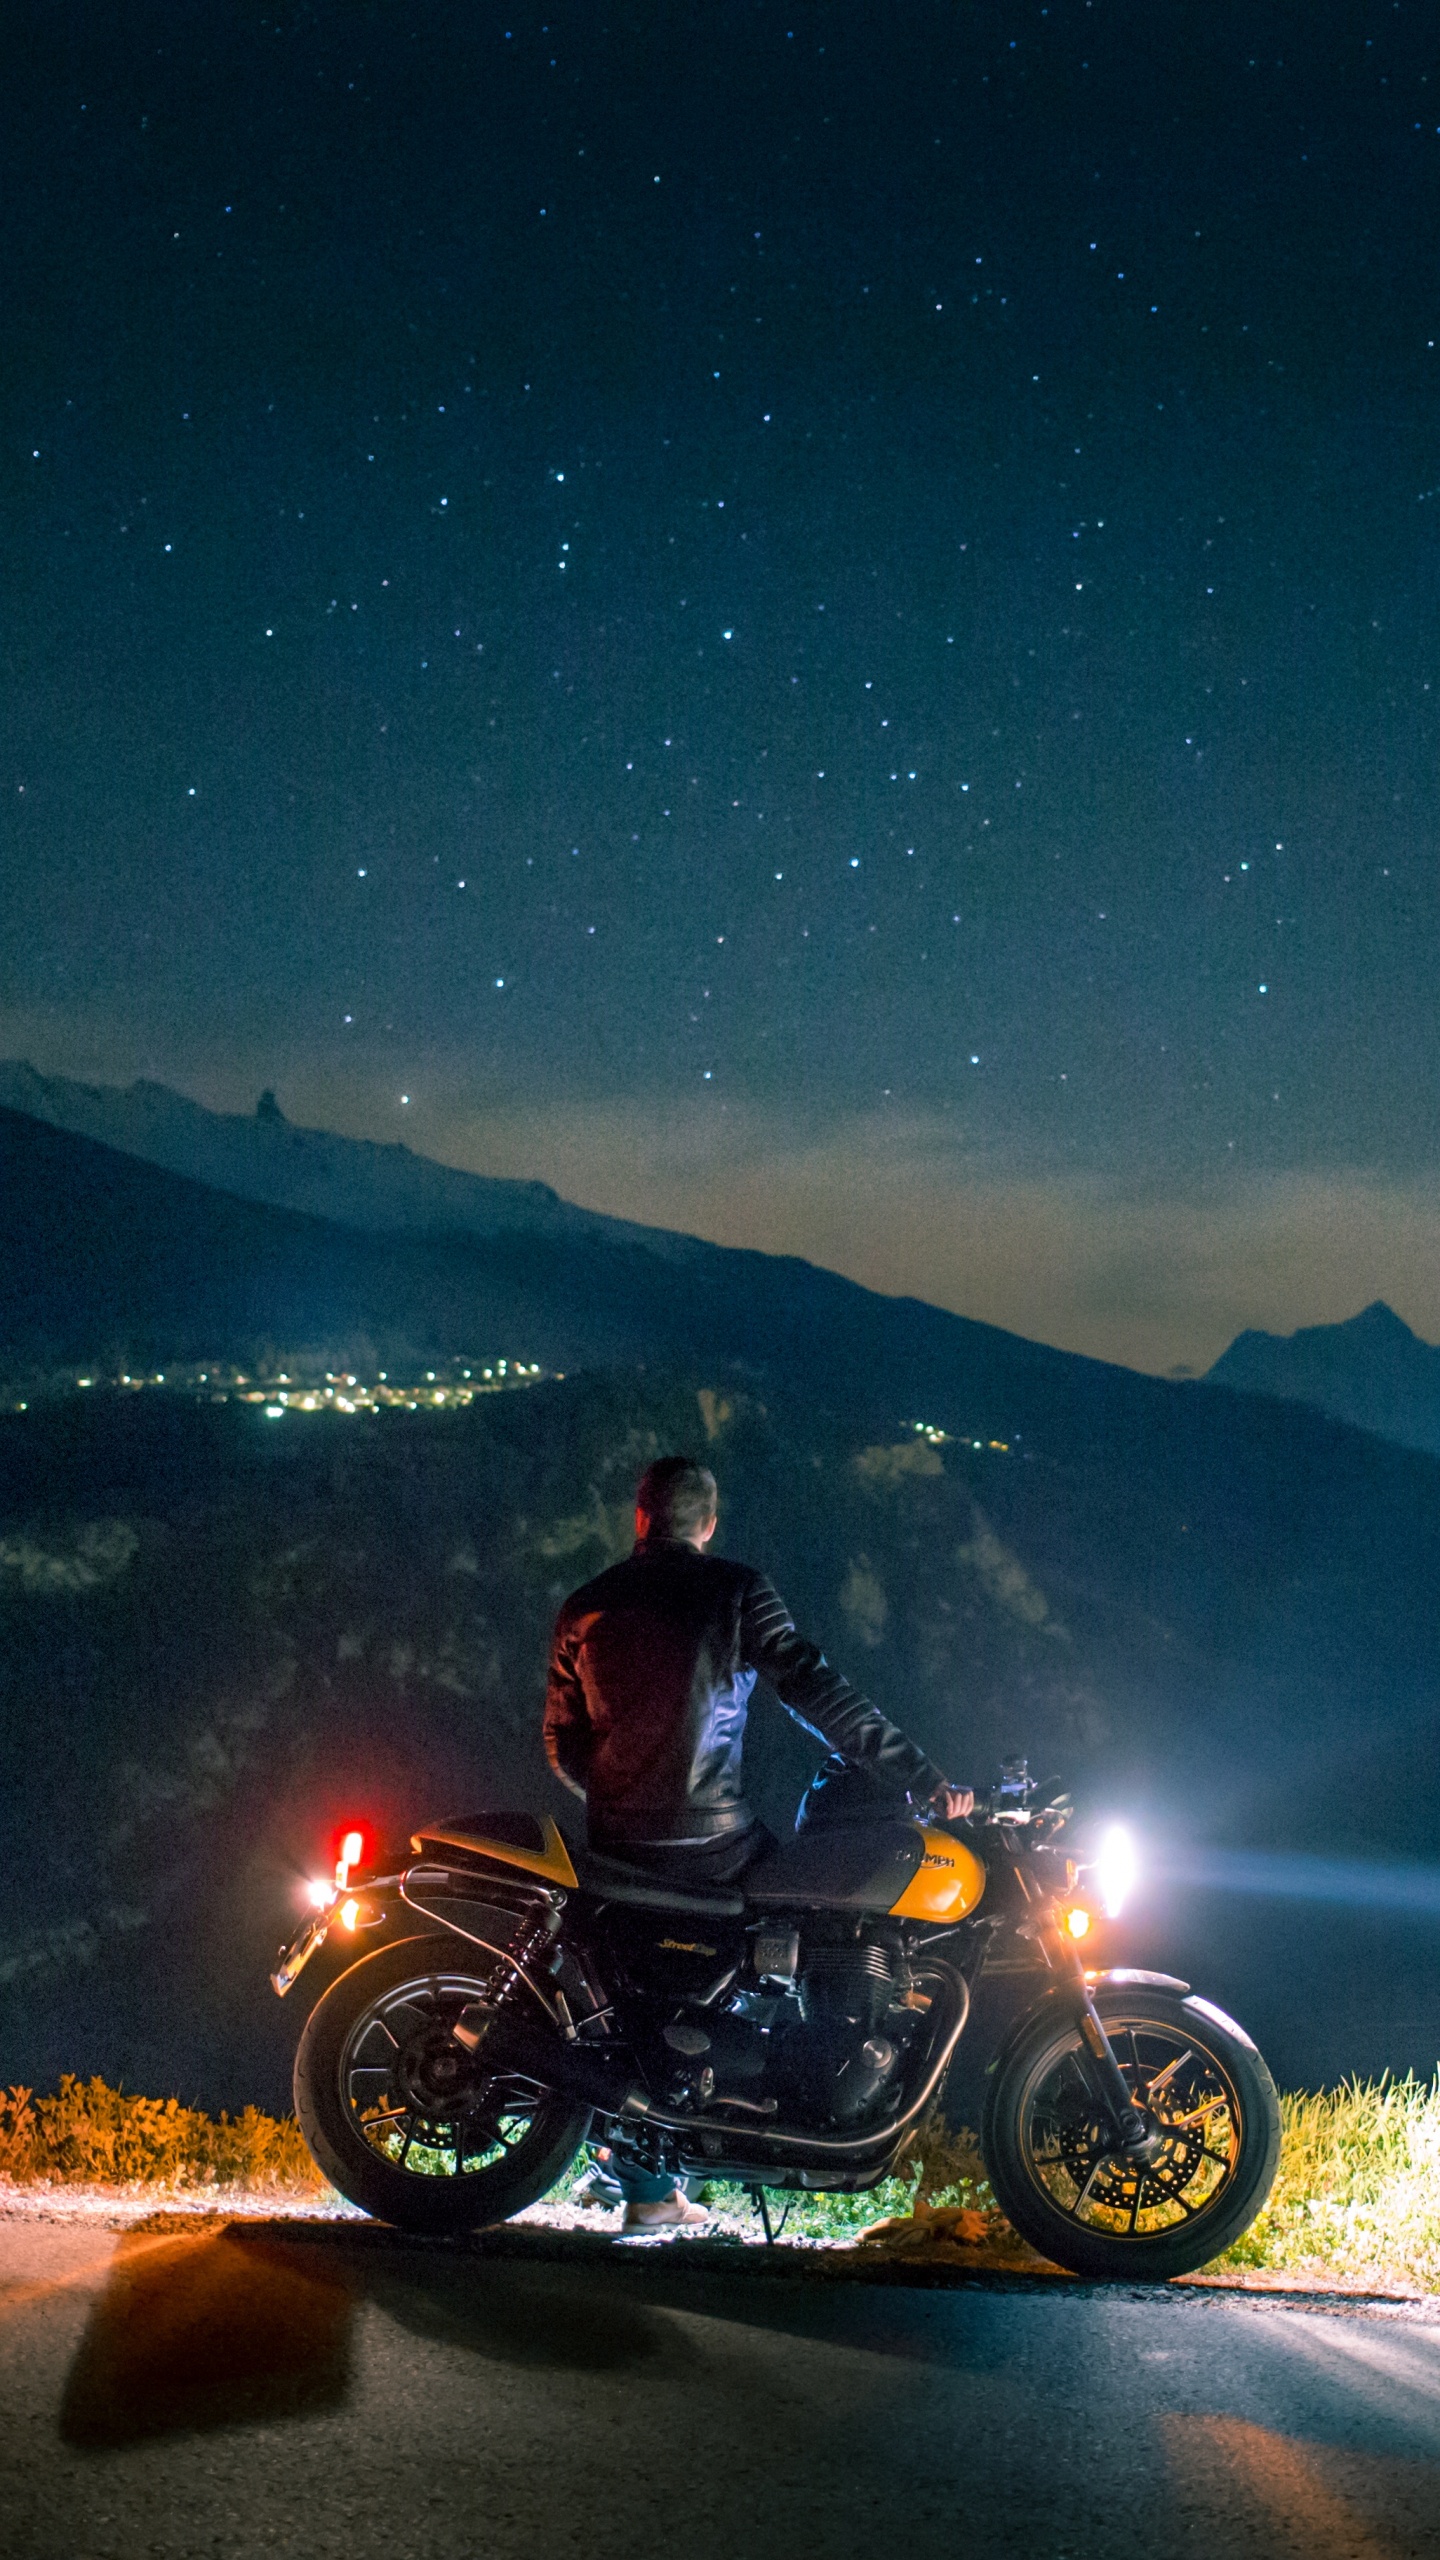 Man Riding Motorcycle on Road During Night Time. Wallpaper in 1440x2560 Resolution